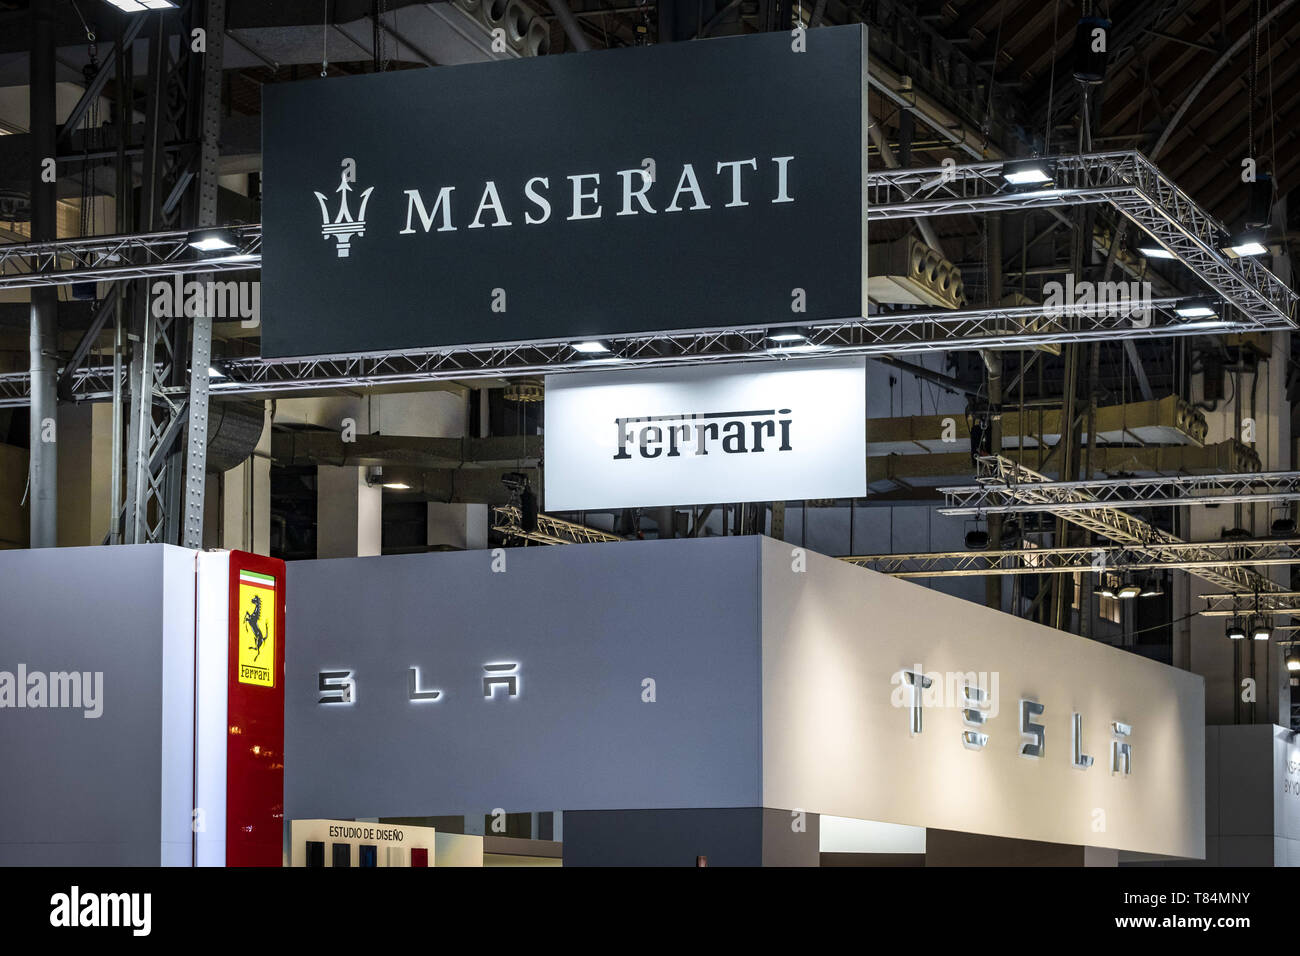 May 10, 2019 - Barcelona, Catalonia, Spain - The brand logos of Maserati, Ferrari and Tesla seen during the event..The Automobile Barcelona trade fair celebrates 100 years. The event takes place from 9 to 19 May at the MontjuÃ¯c fairgrounds. With more than 150,000 square meters and 45 brands, the fair shows the latest vehicle models as well as the latest technologies applied to driving. (Credit Image: © Paco Freire/SOPA Images via ZUMA Wire) Stock Photo